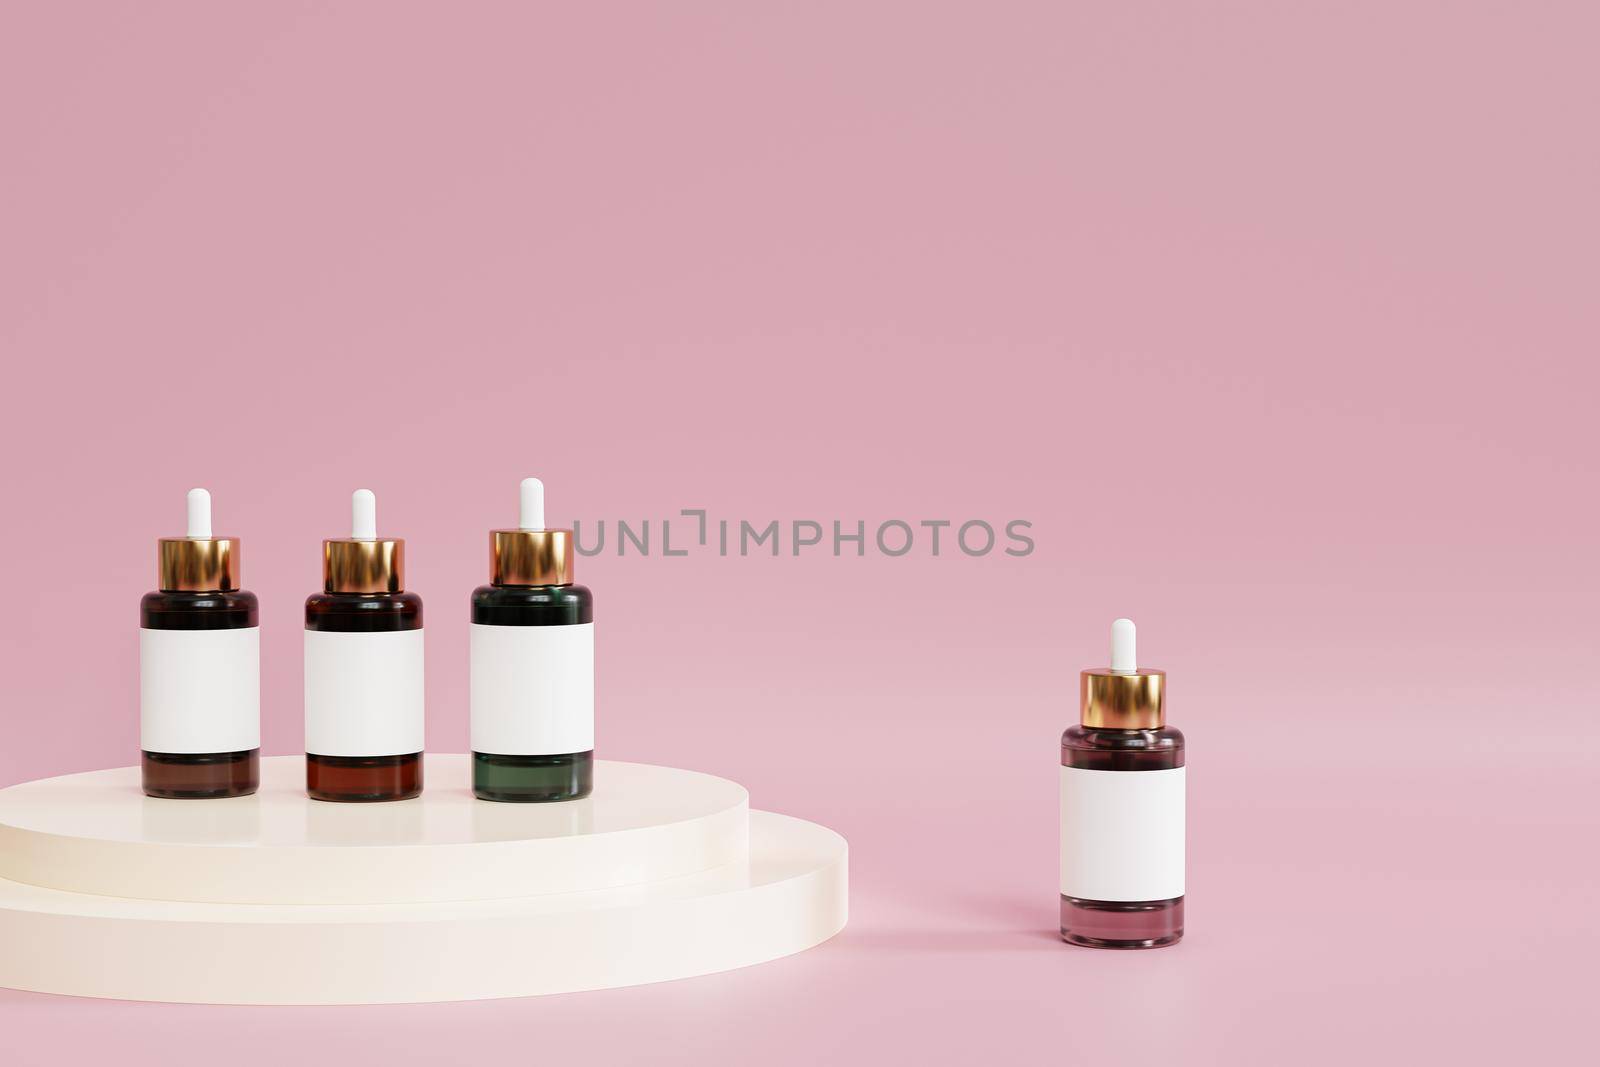 Mockup dropper bottles with label for cosmetics products or advertising on pink background, 3d illustration render by Frostroomhead